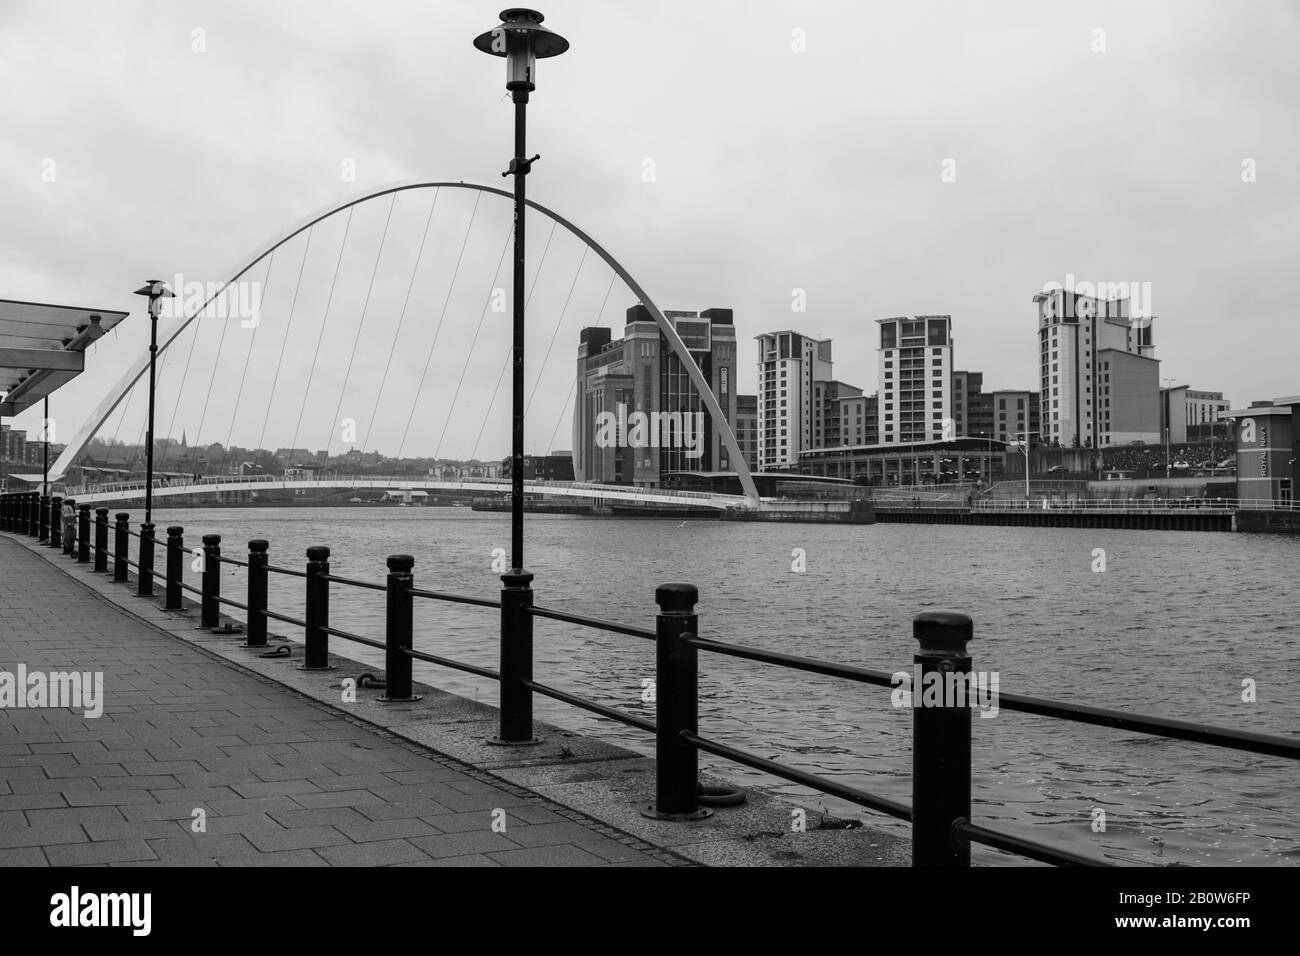 The Gateshead Millennium Bridge on the River Tyne. This redeveloped area features high-rise residential buildings, art galleries, bars and restaurants Stock Photo